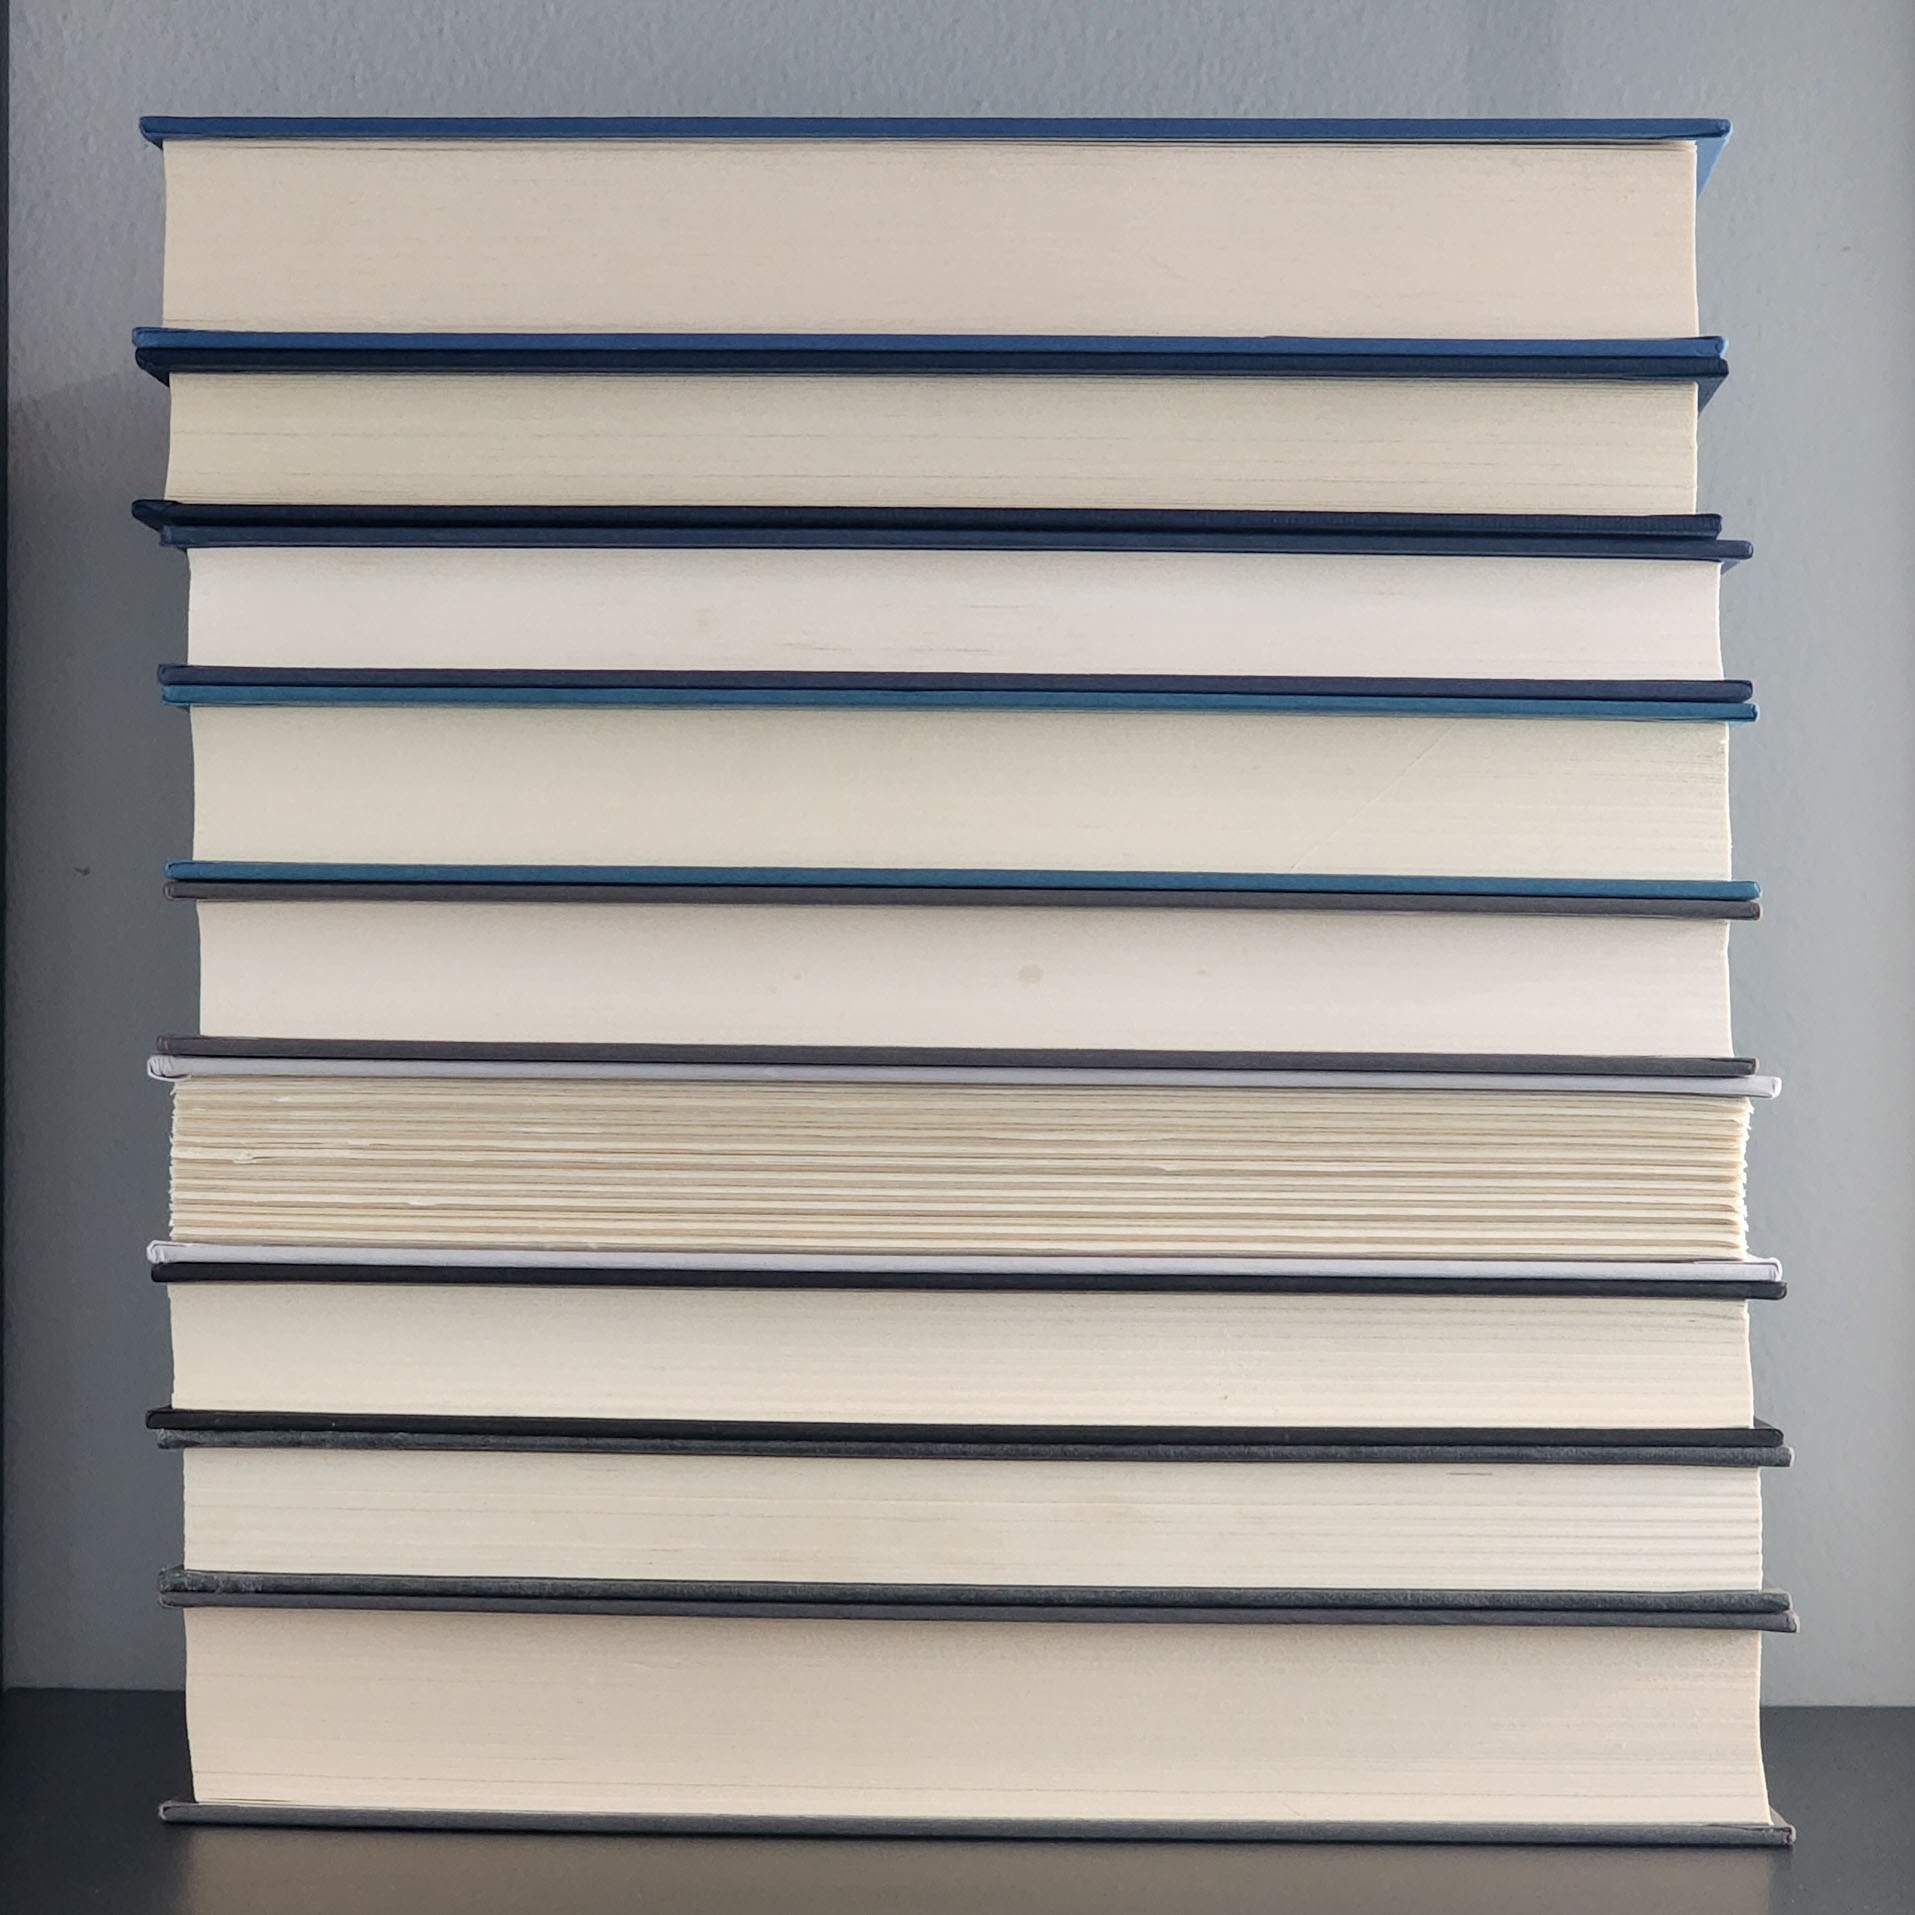 Is stack of hardcover books in blues and grays used as shelf décor